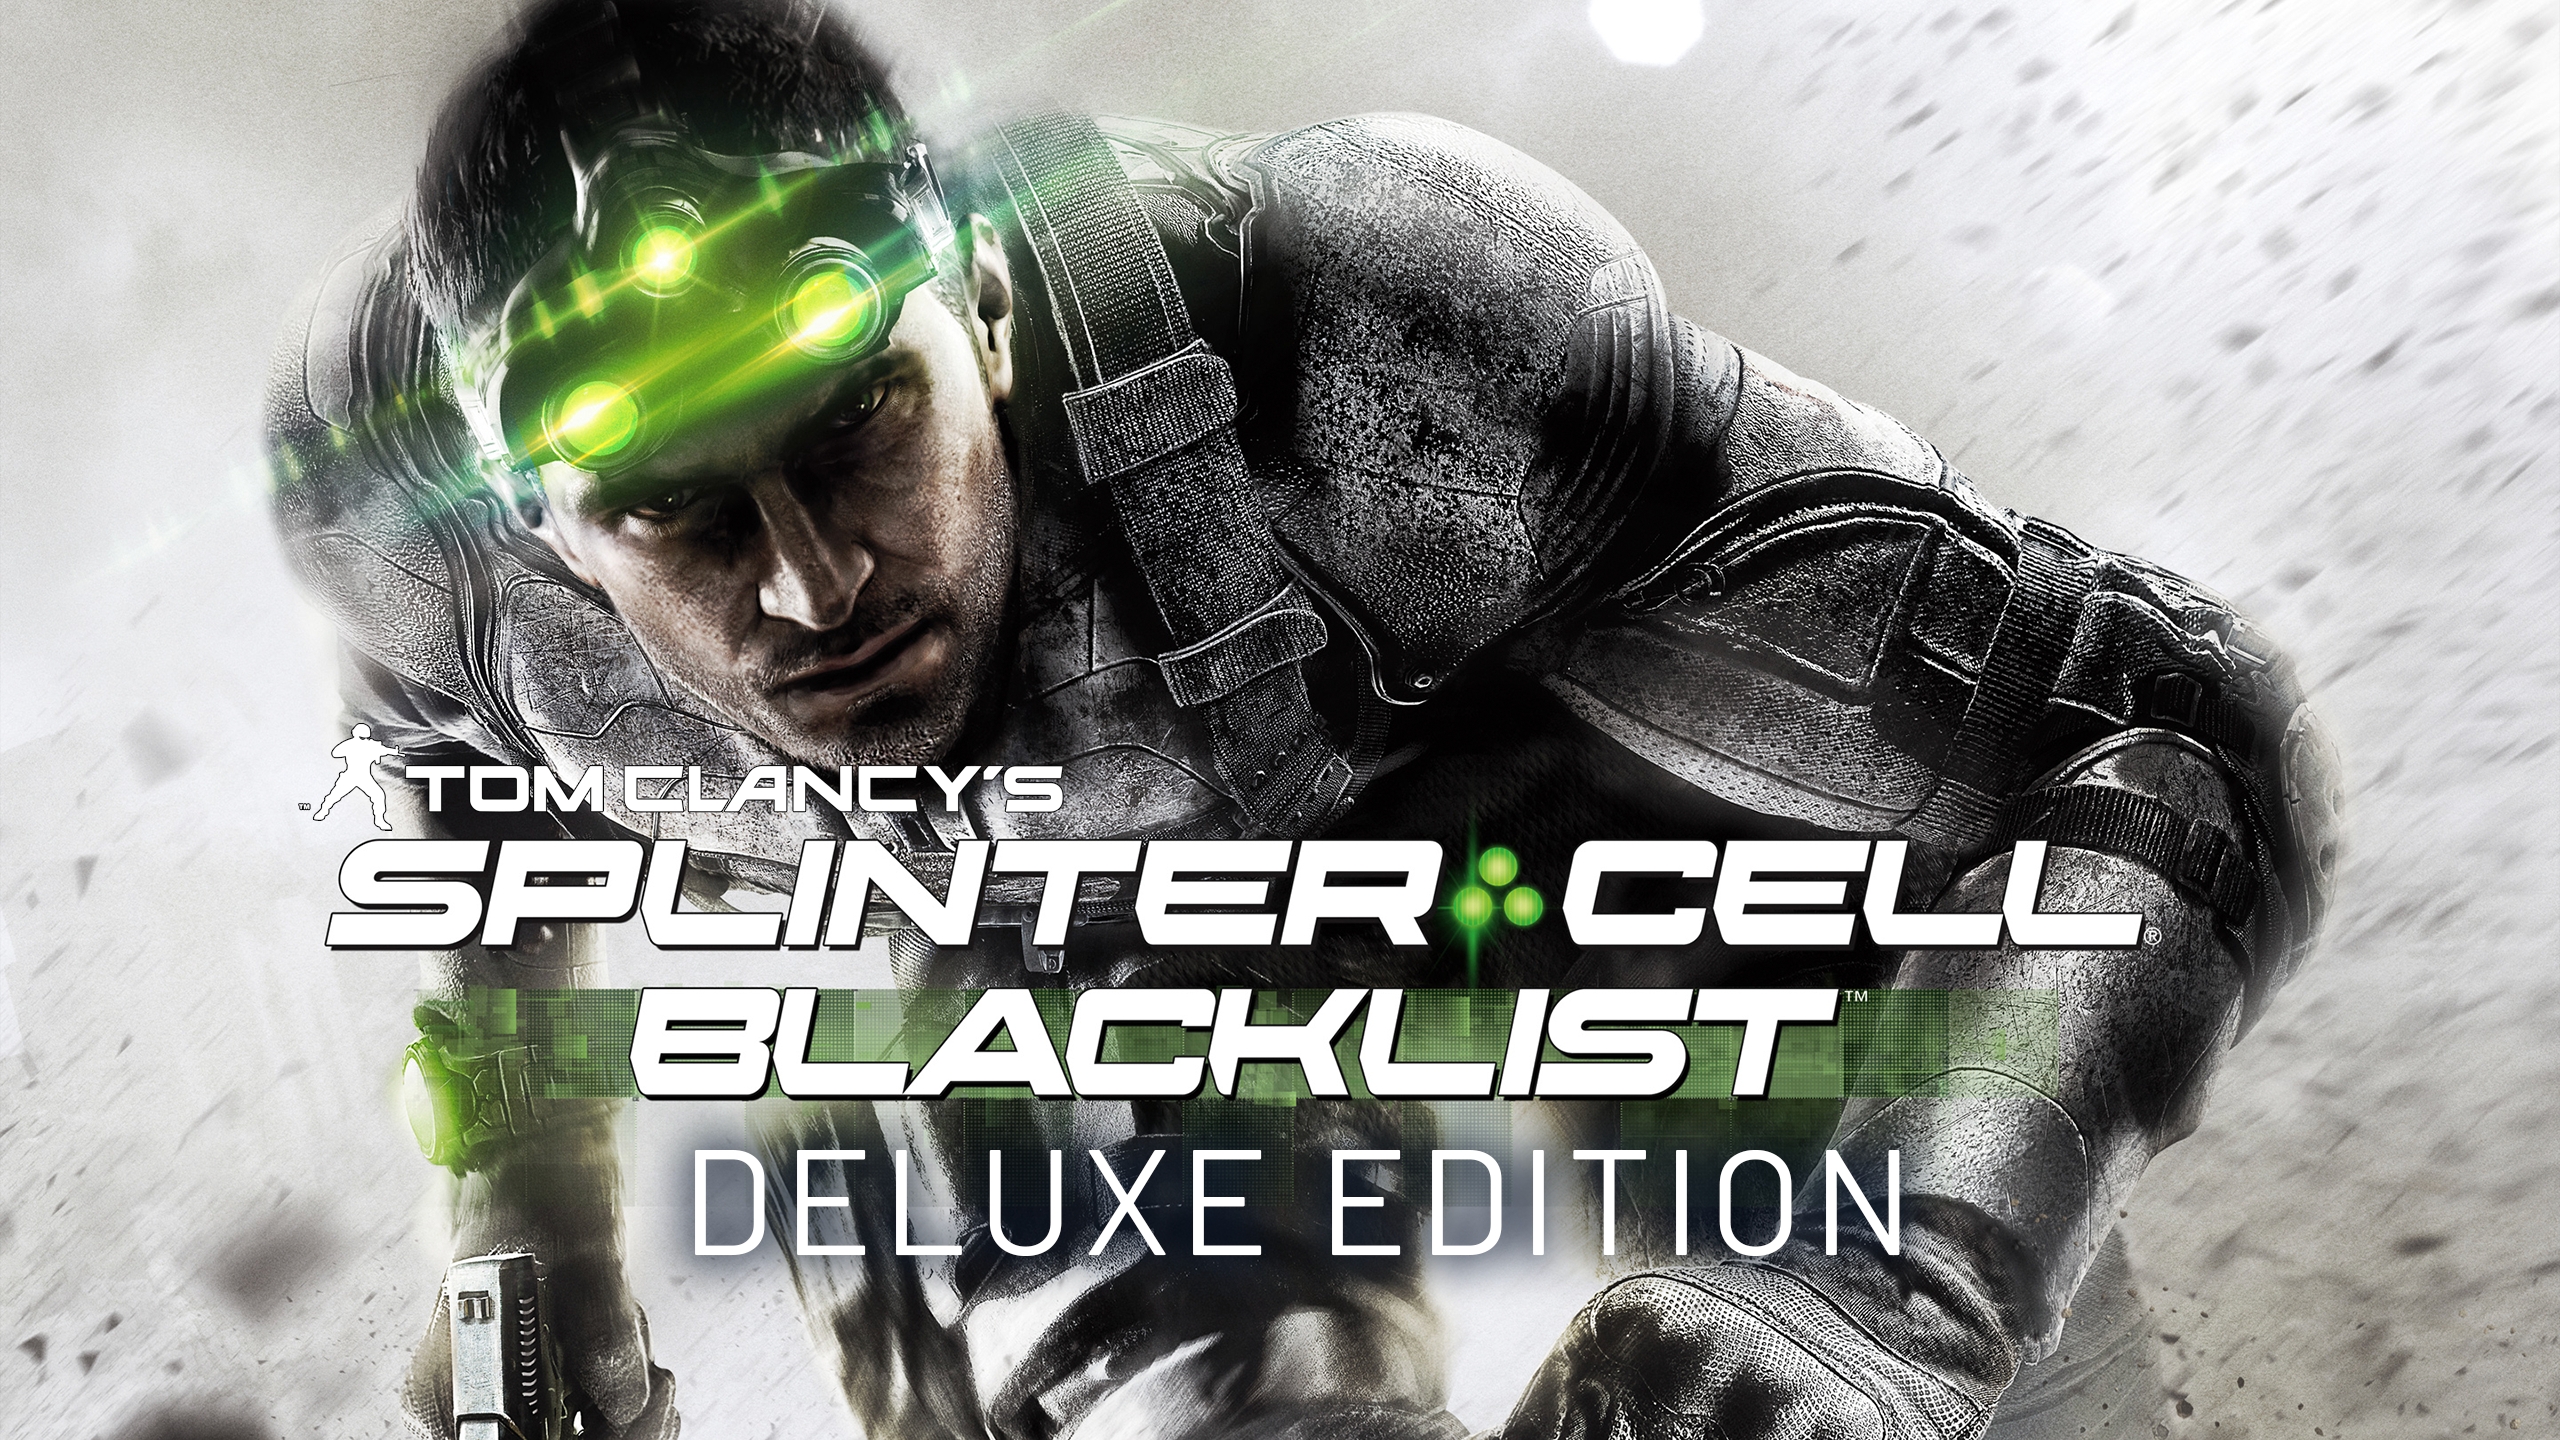 Ubisoft Announces Tom Clancy's Splinter Cell Blacklist Collector's Edition  for North America and Latin America